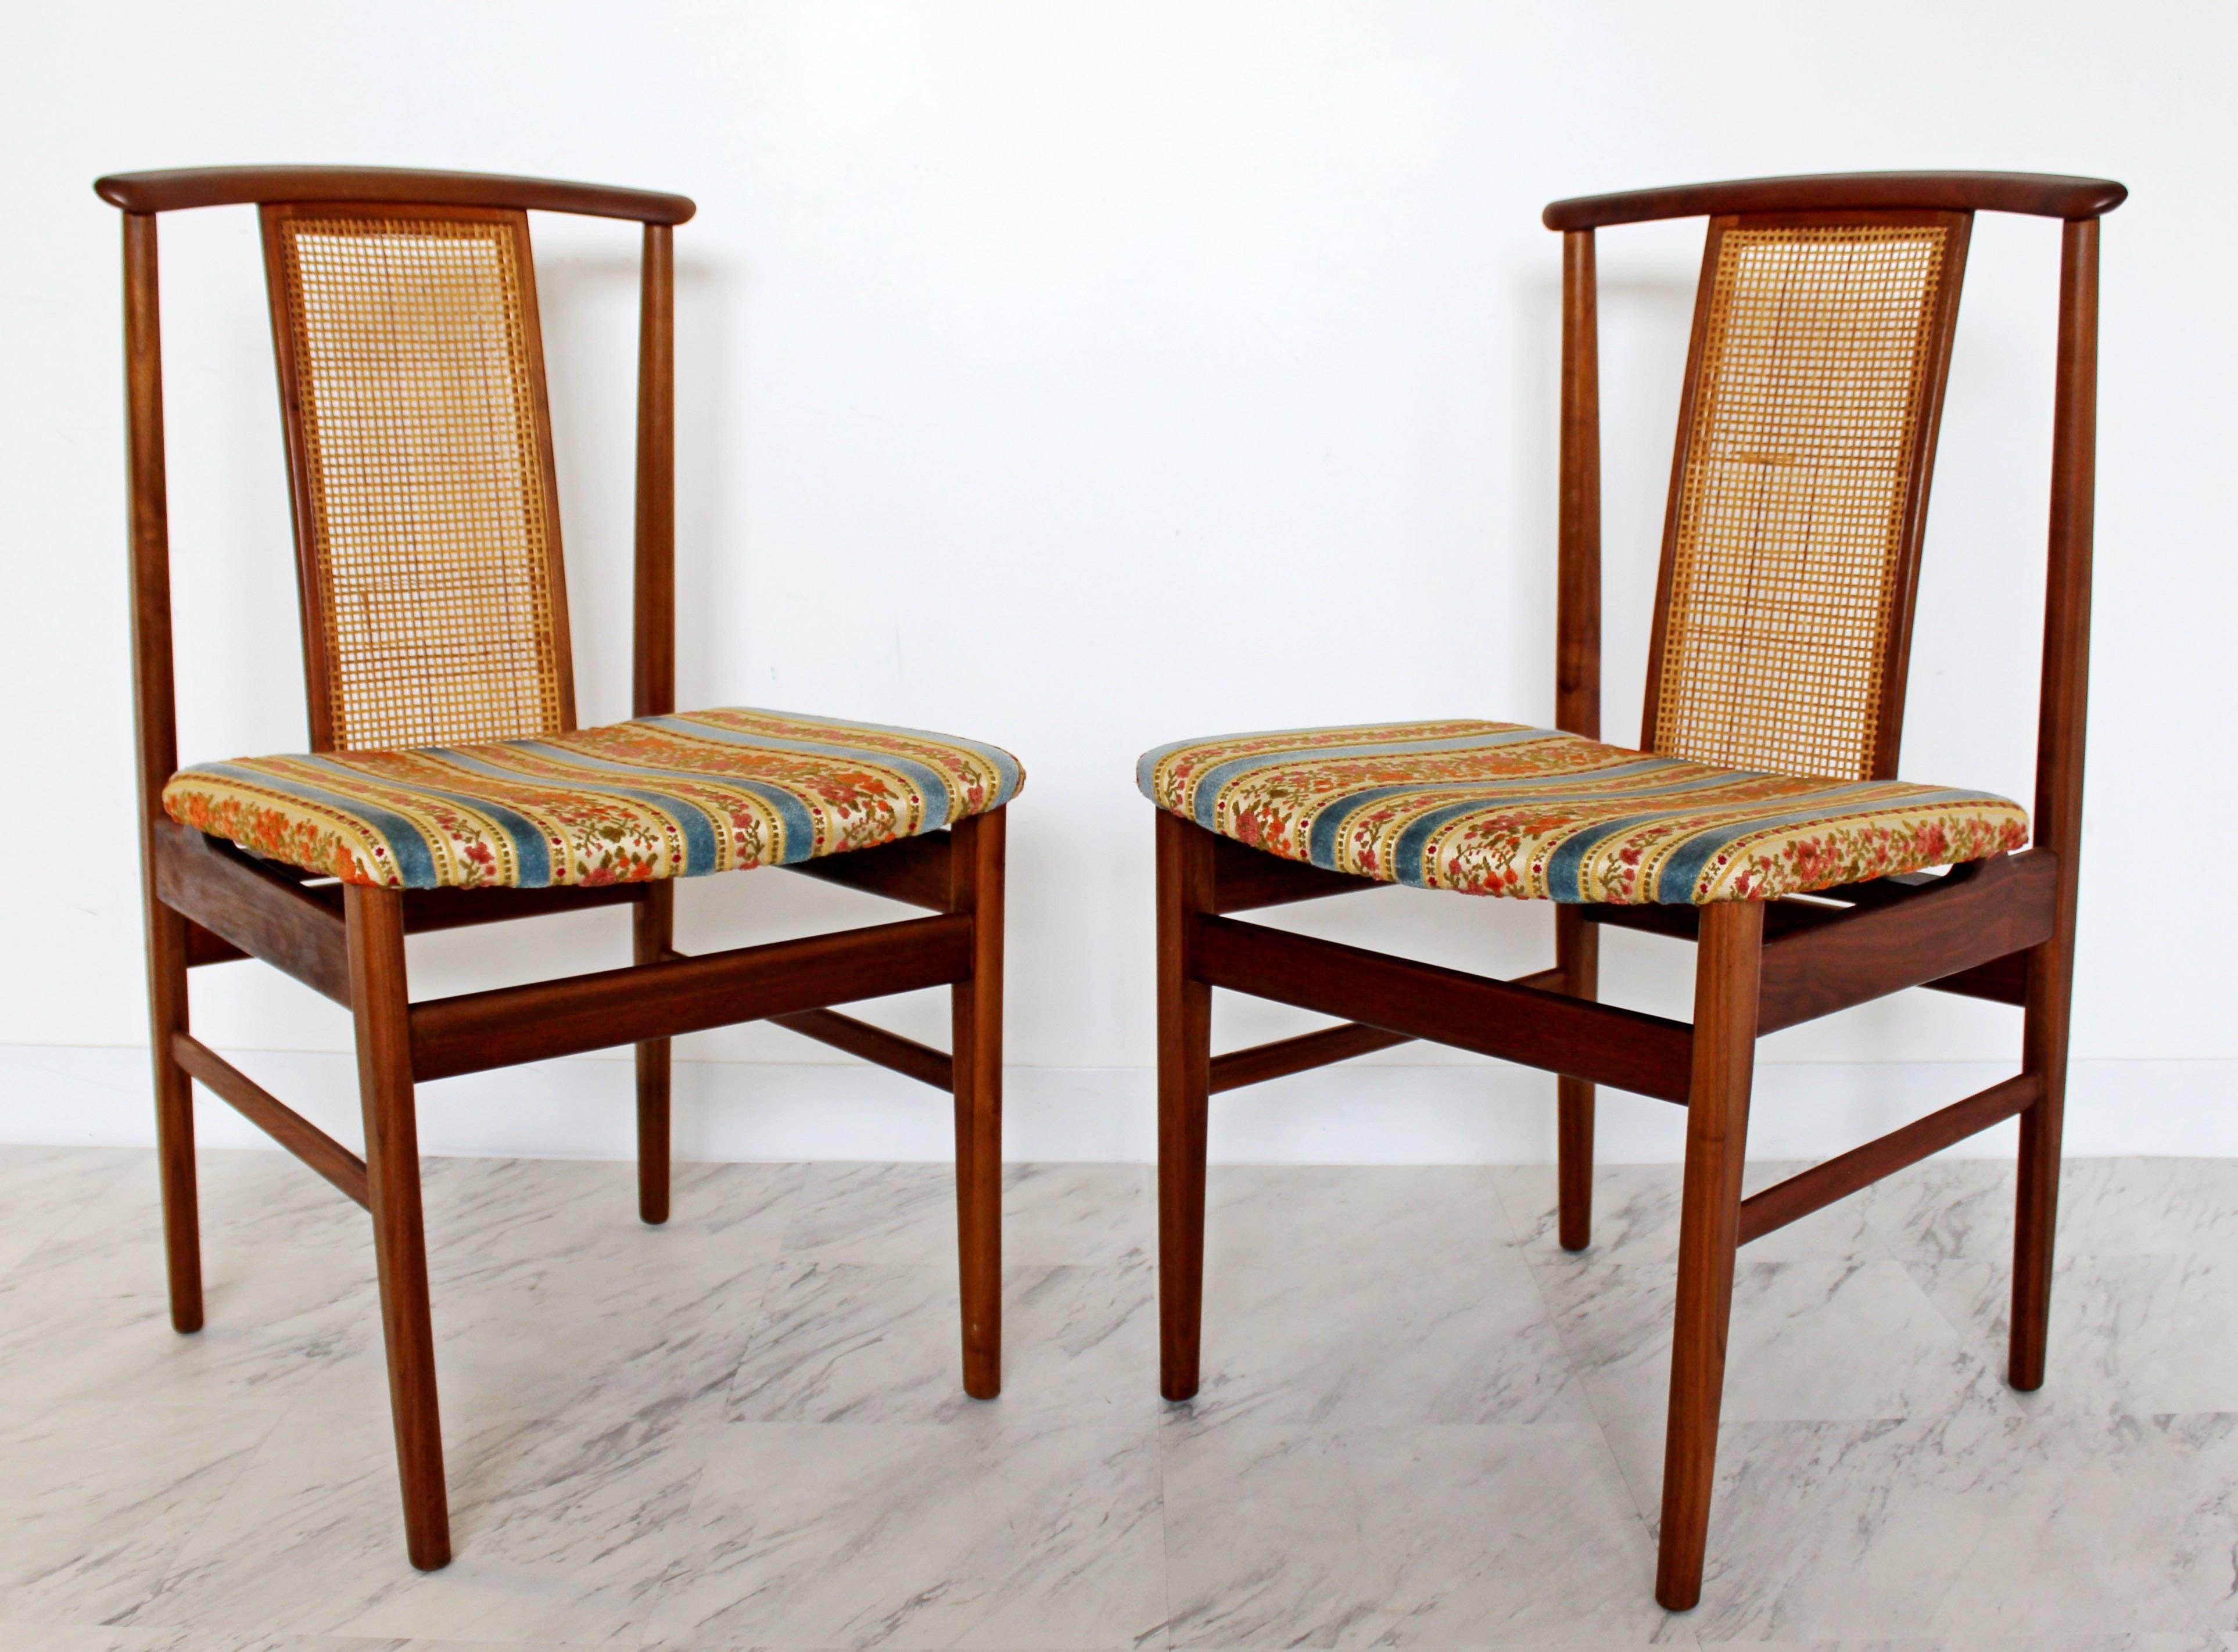 For your consideration is a stunning, set of eight, teak and cane, side dining chairs, by Folke Olsson for Swedish company DUX, circa 1960s. In excellent condition. Chairs can be professionally reupholstered for $400. The dimensions are 19